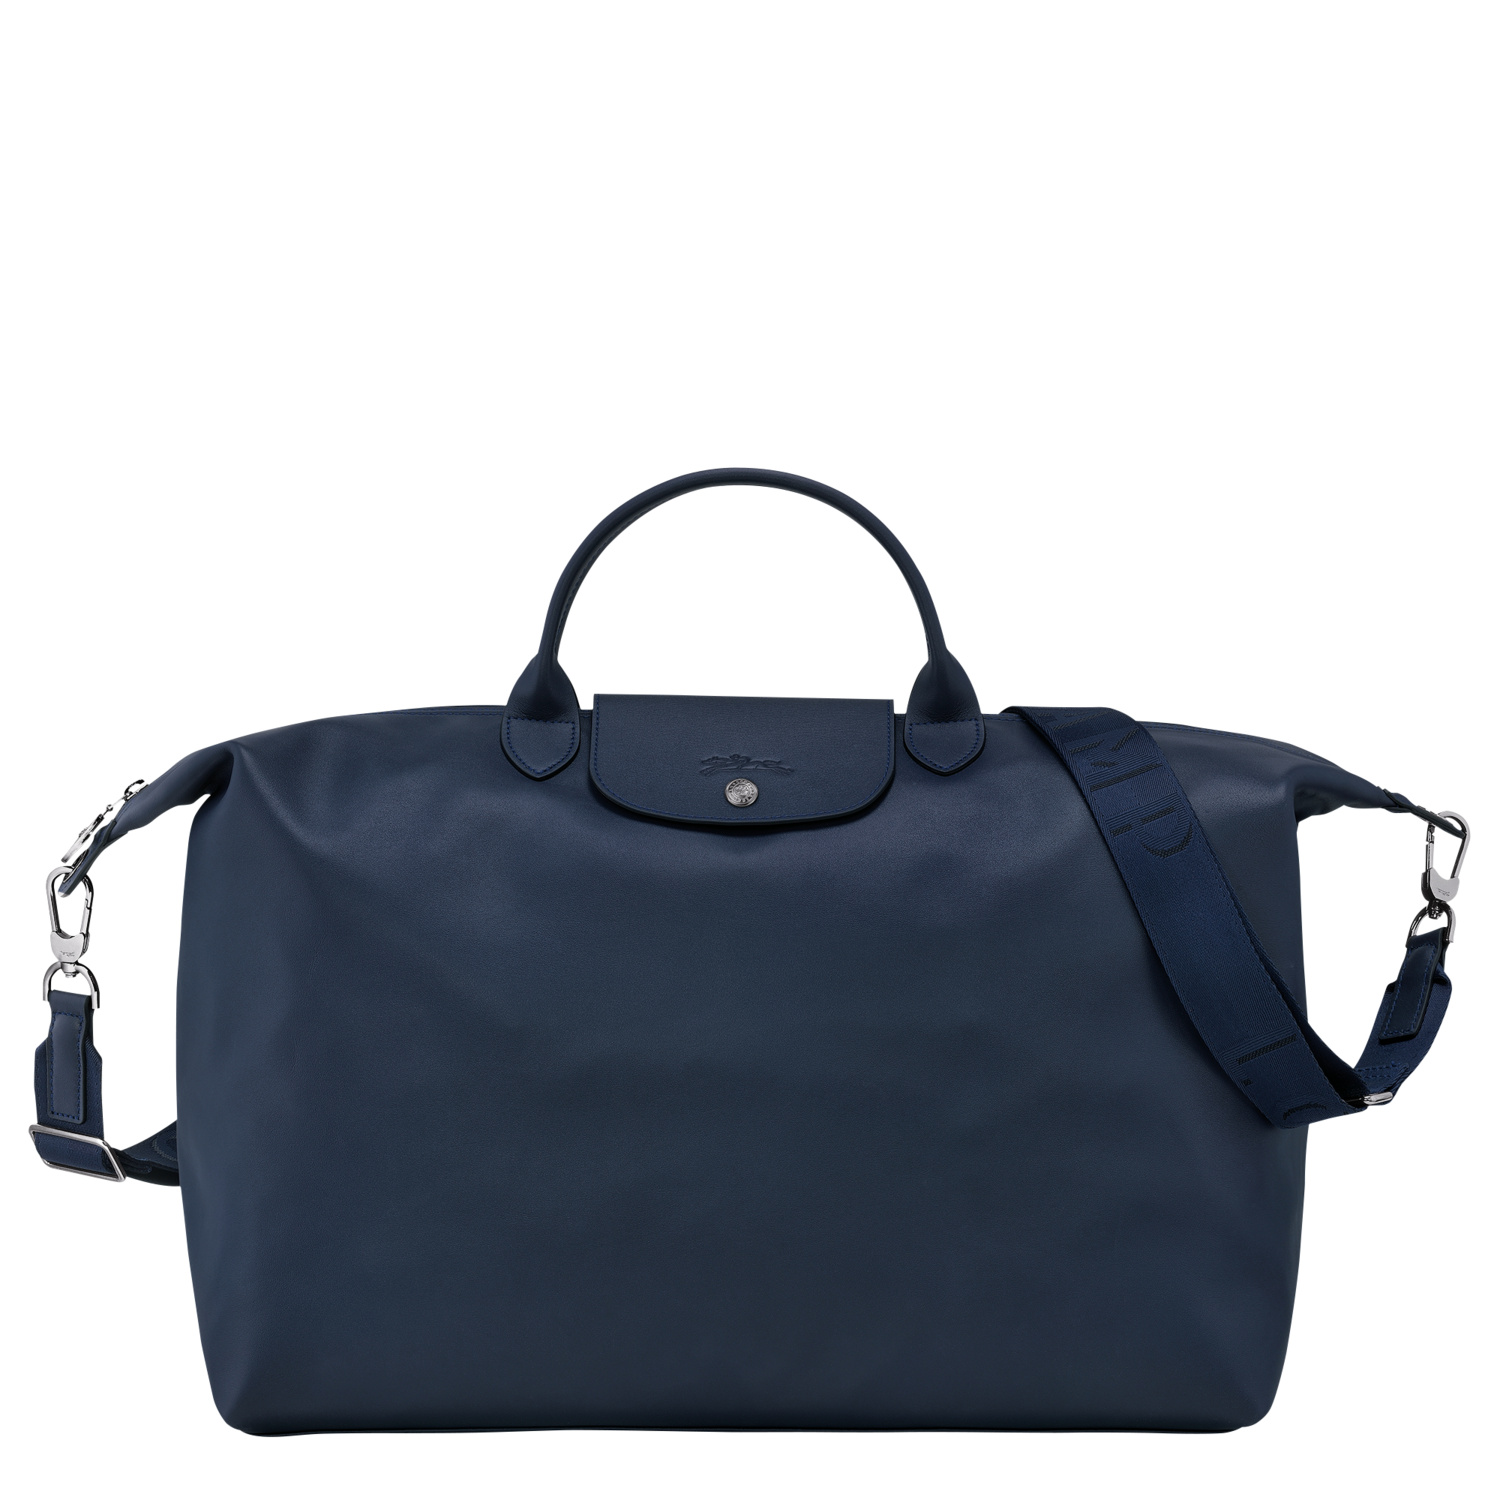 Longchamp Travel Bag S Le Pliage Xtra In Navy